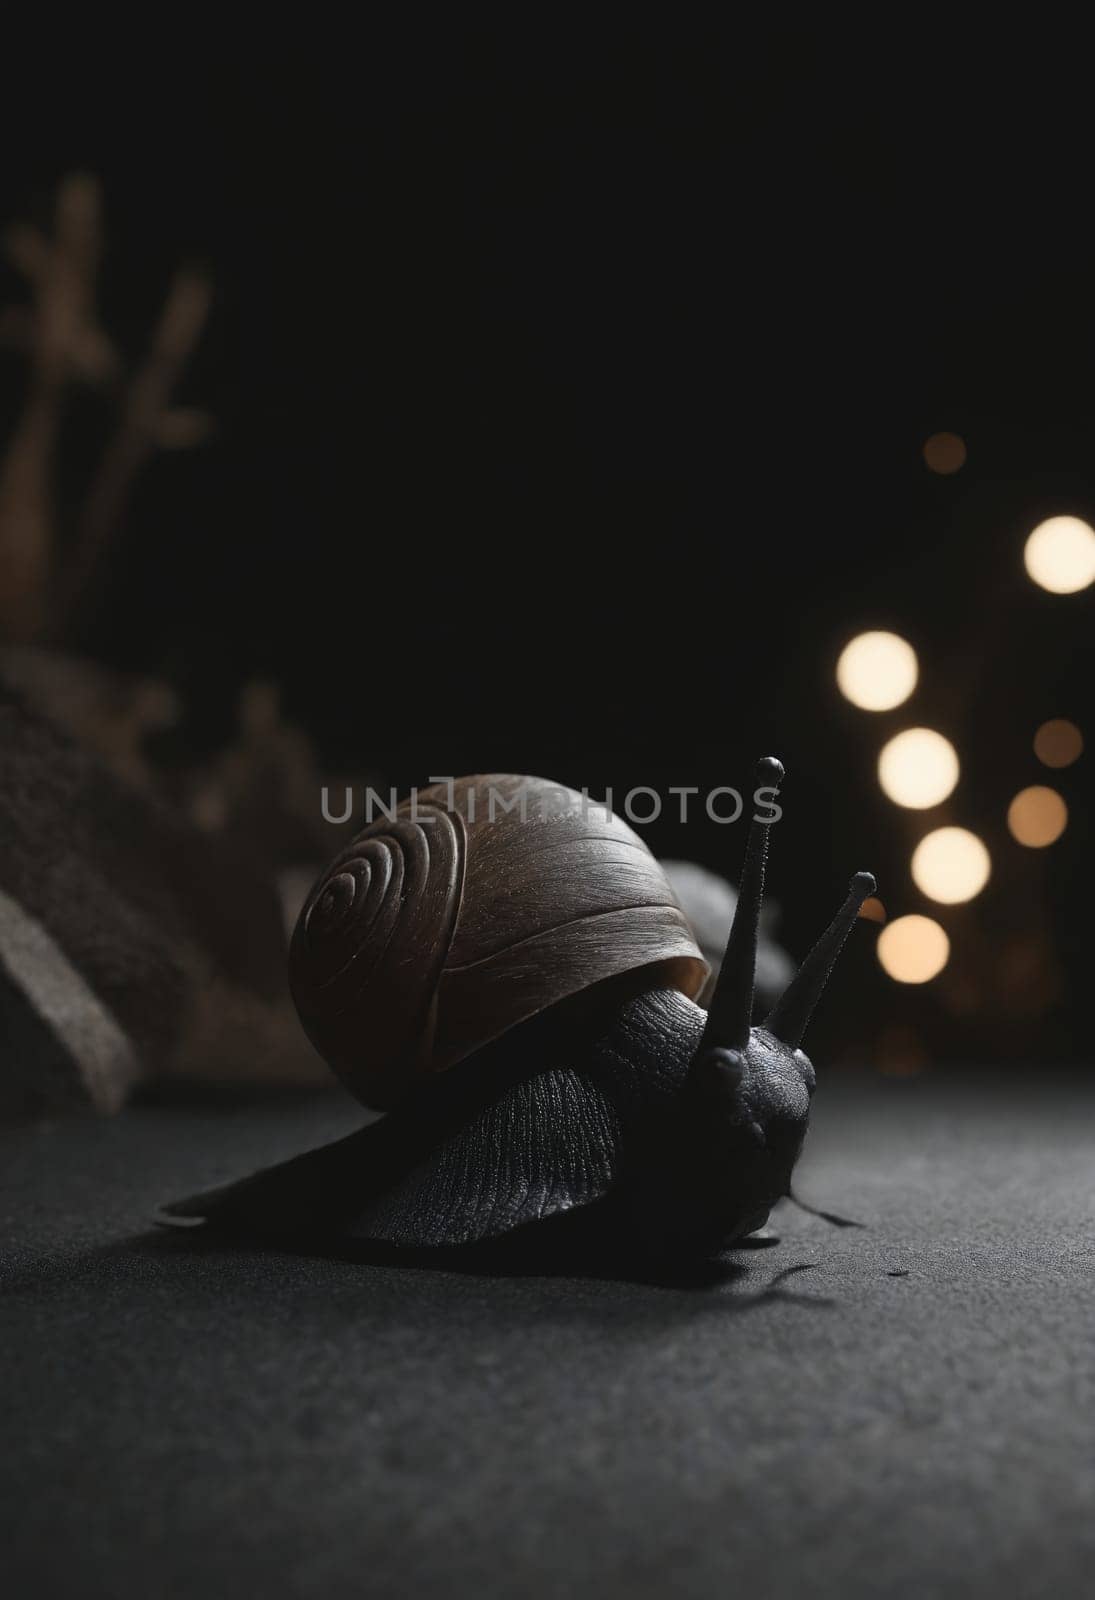 Journey to Light: Snail Crossing a Shadowed Path by Andre1ns